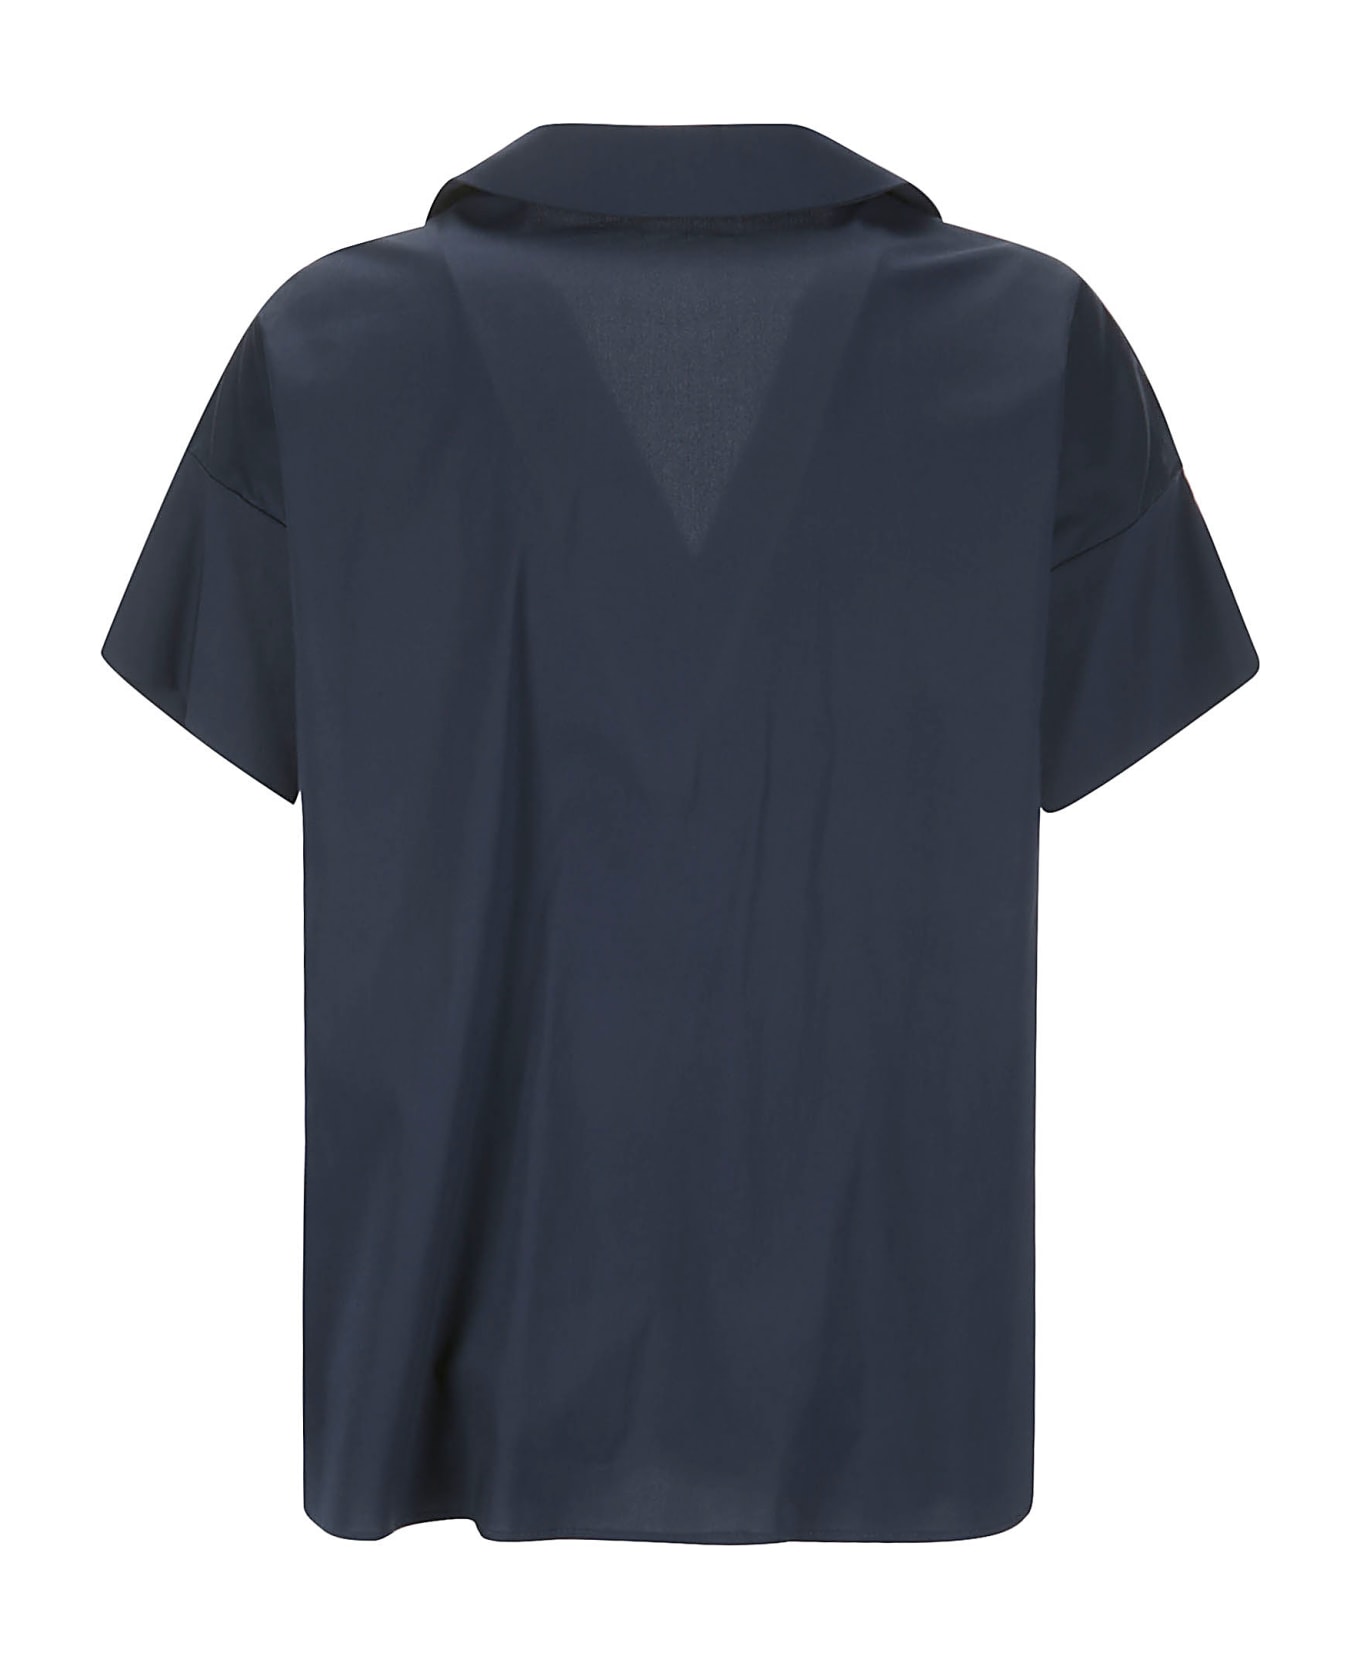 Hira Large Cotton Shirt Without Buttons - BLUE